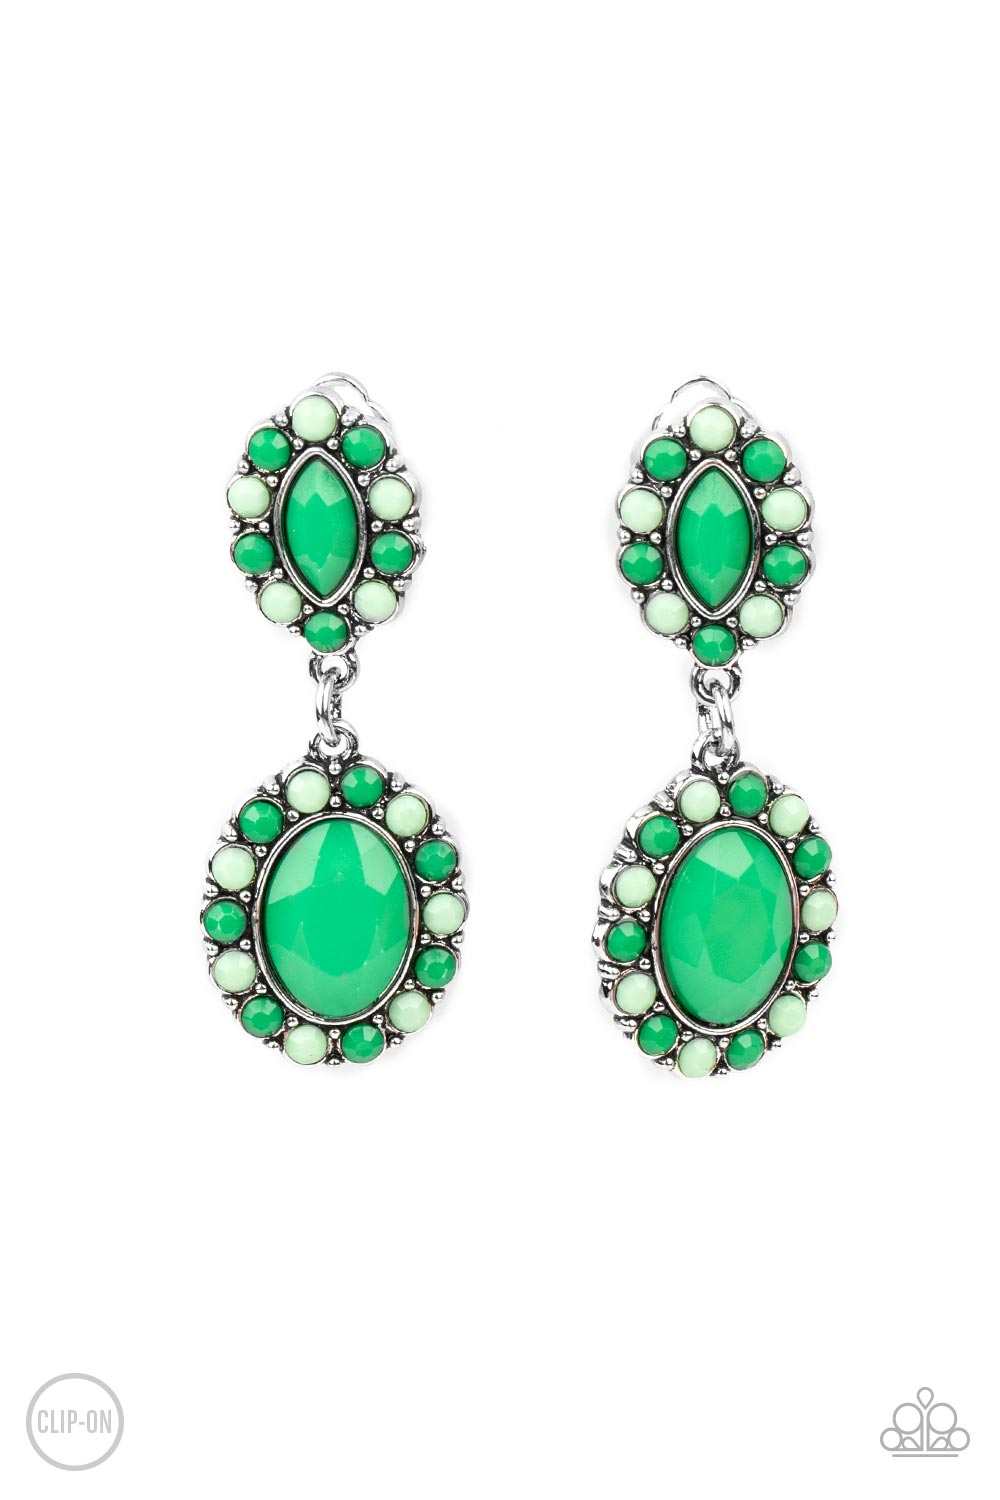 Positively Pampered - Green Earrings - Paparazzi Accessories